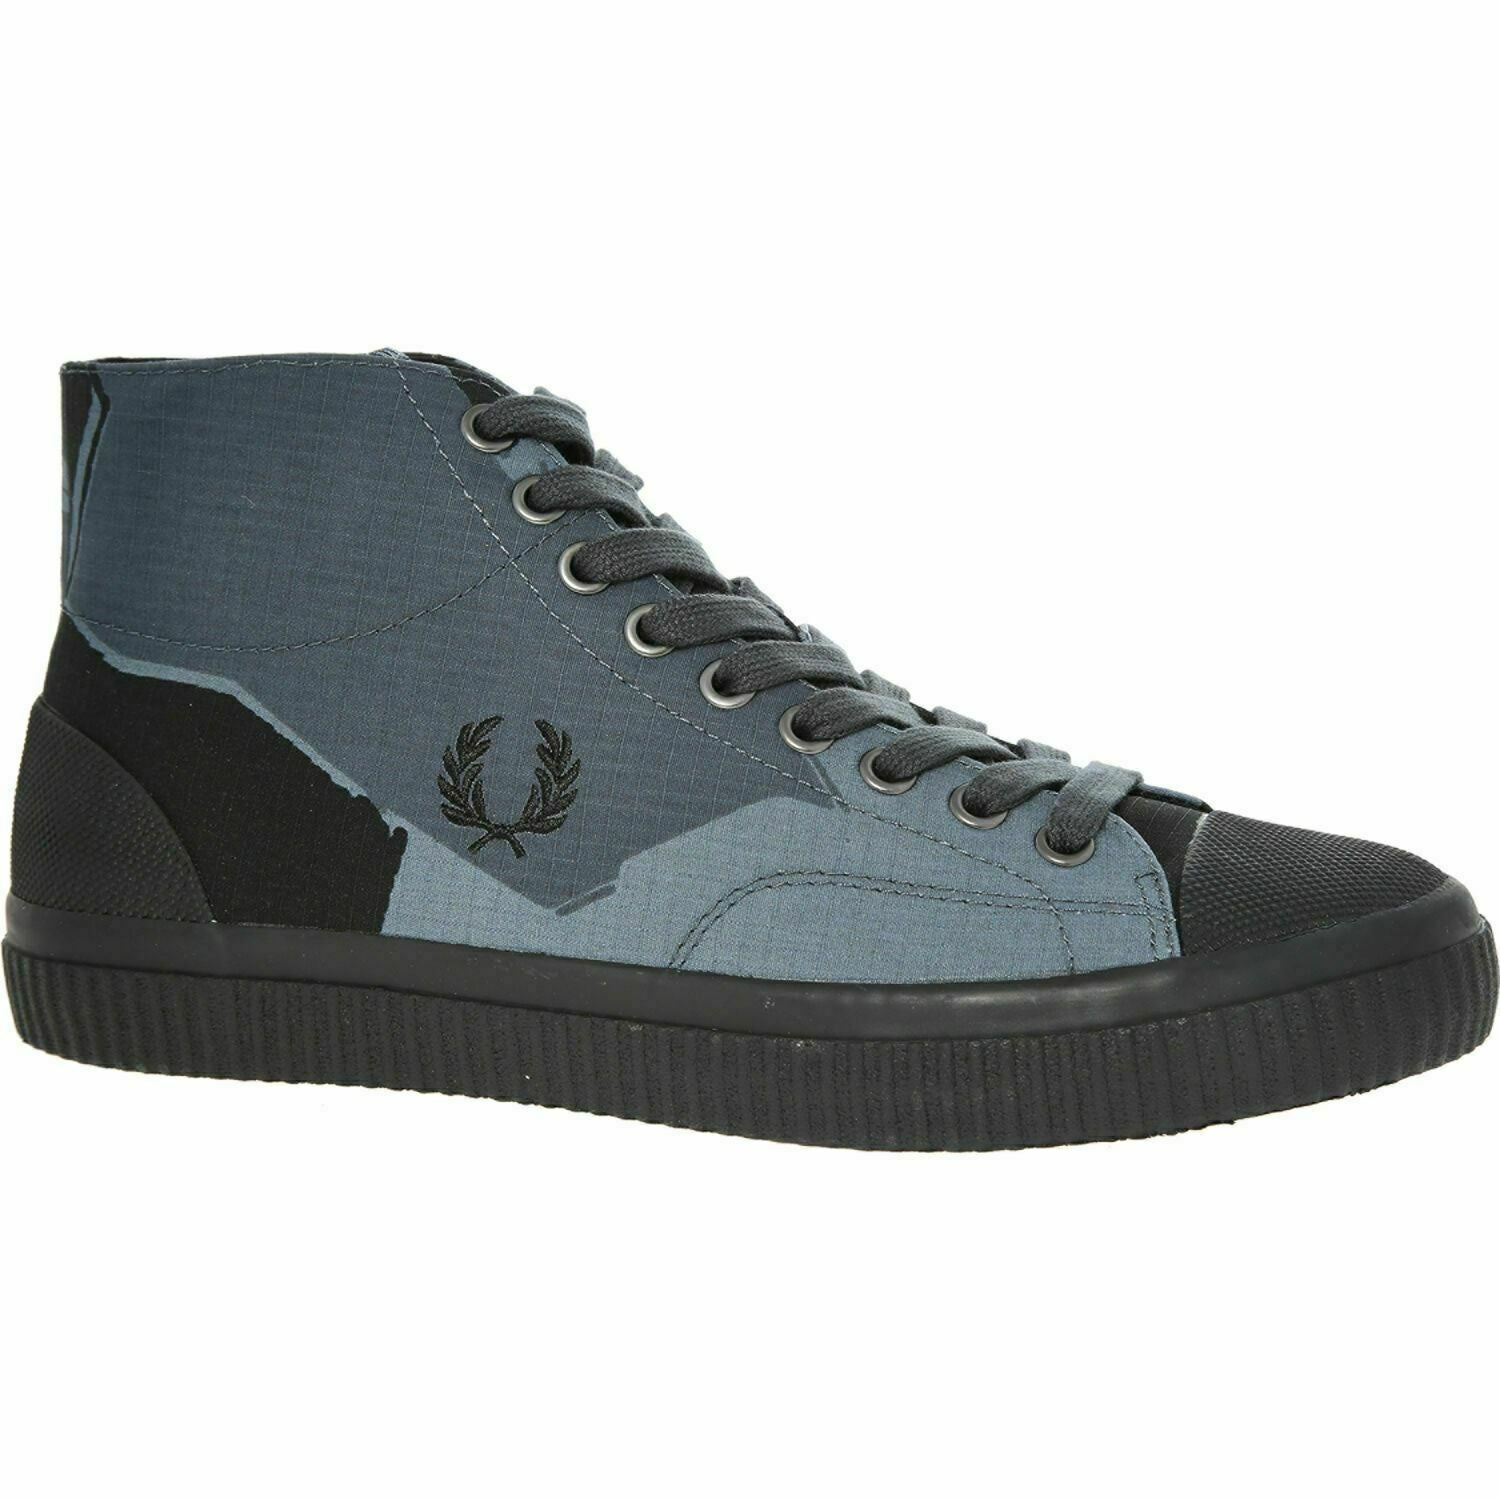 FRED PERRY Men's HUGHES Blue Airforce Camo High Top Canvas Trainers, UK 10 EU 45